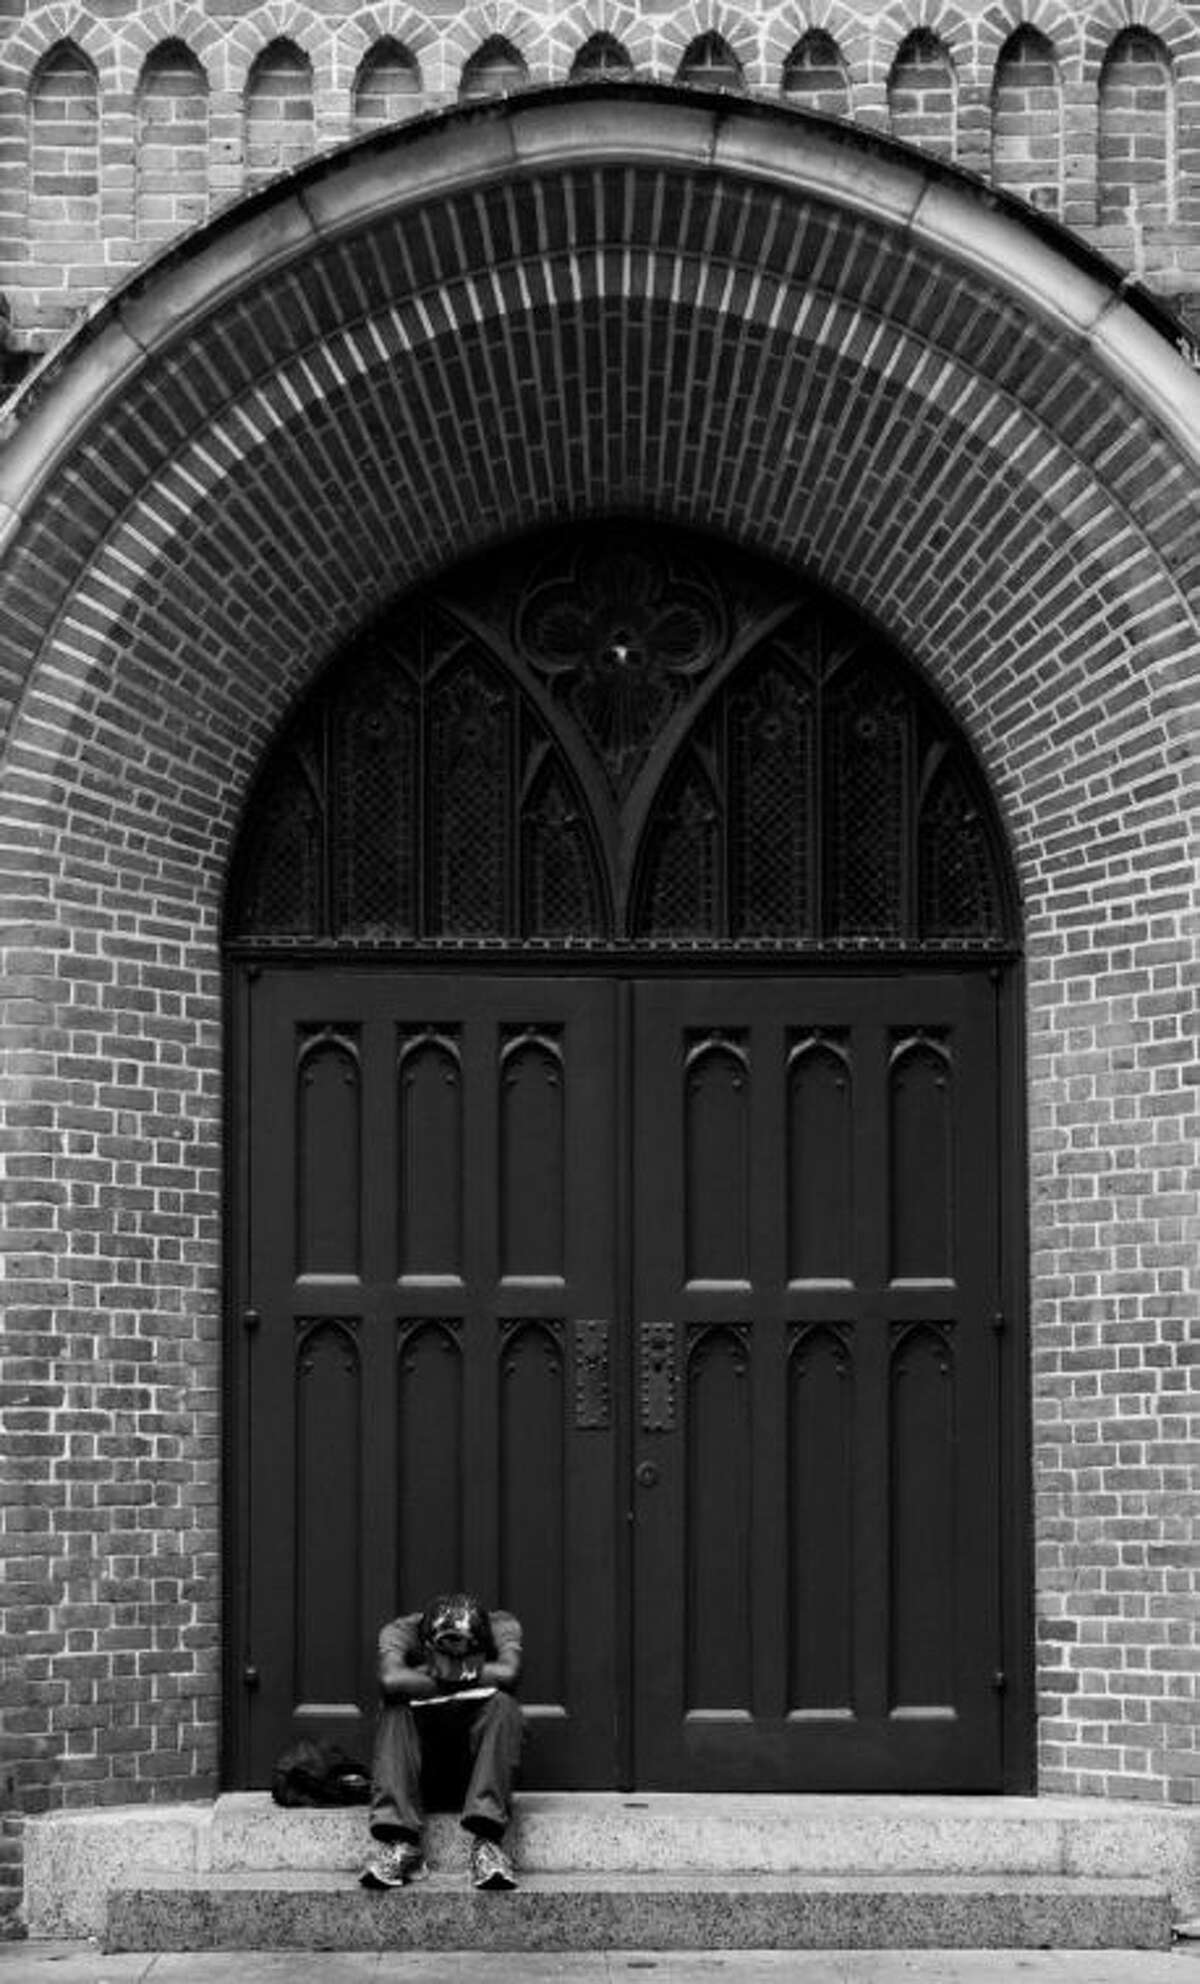 This black and white street photography was taken September 2013 at a church in downtown Houston by area resident Ansel Arnold of an anonymous man resting under a large brick archway.